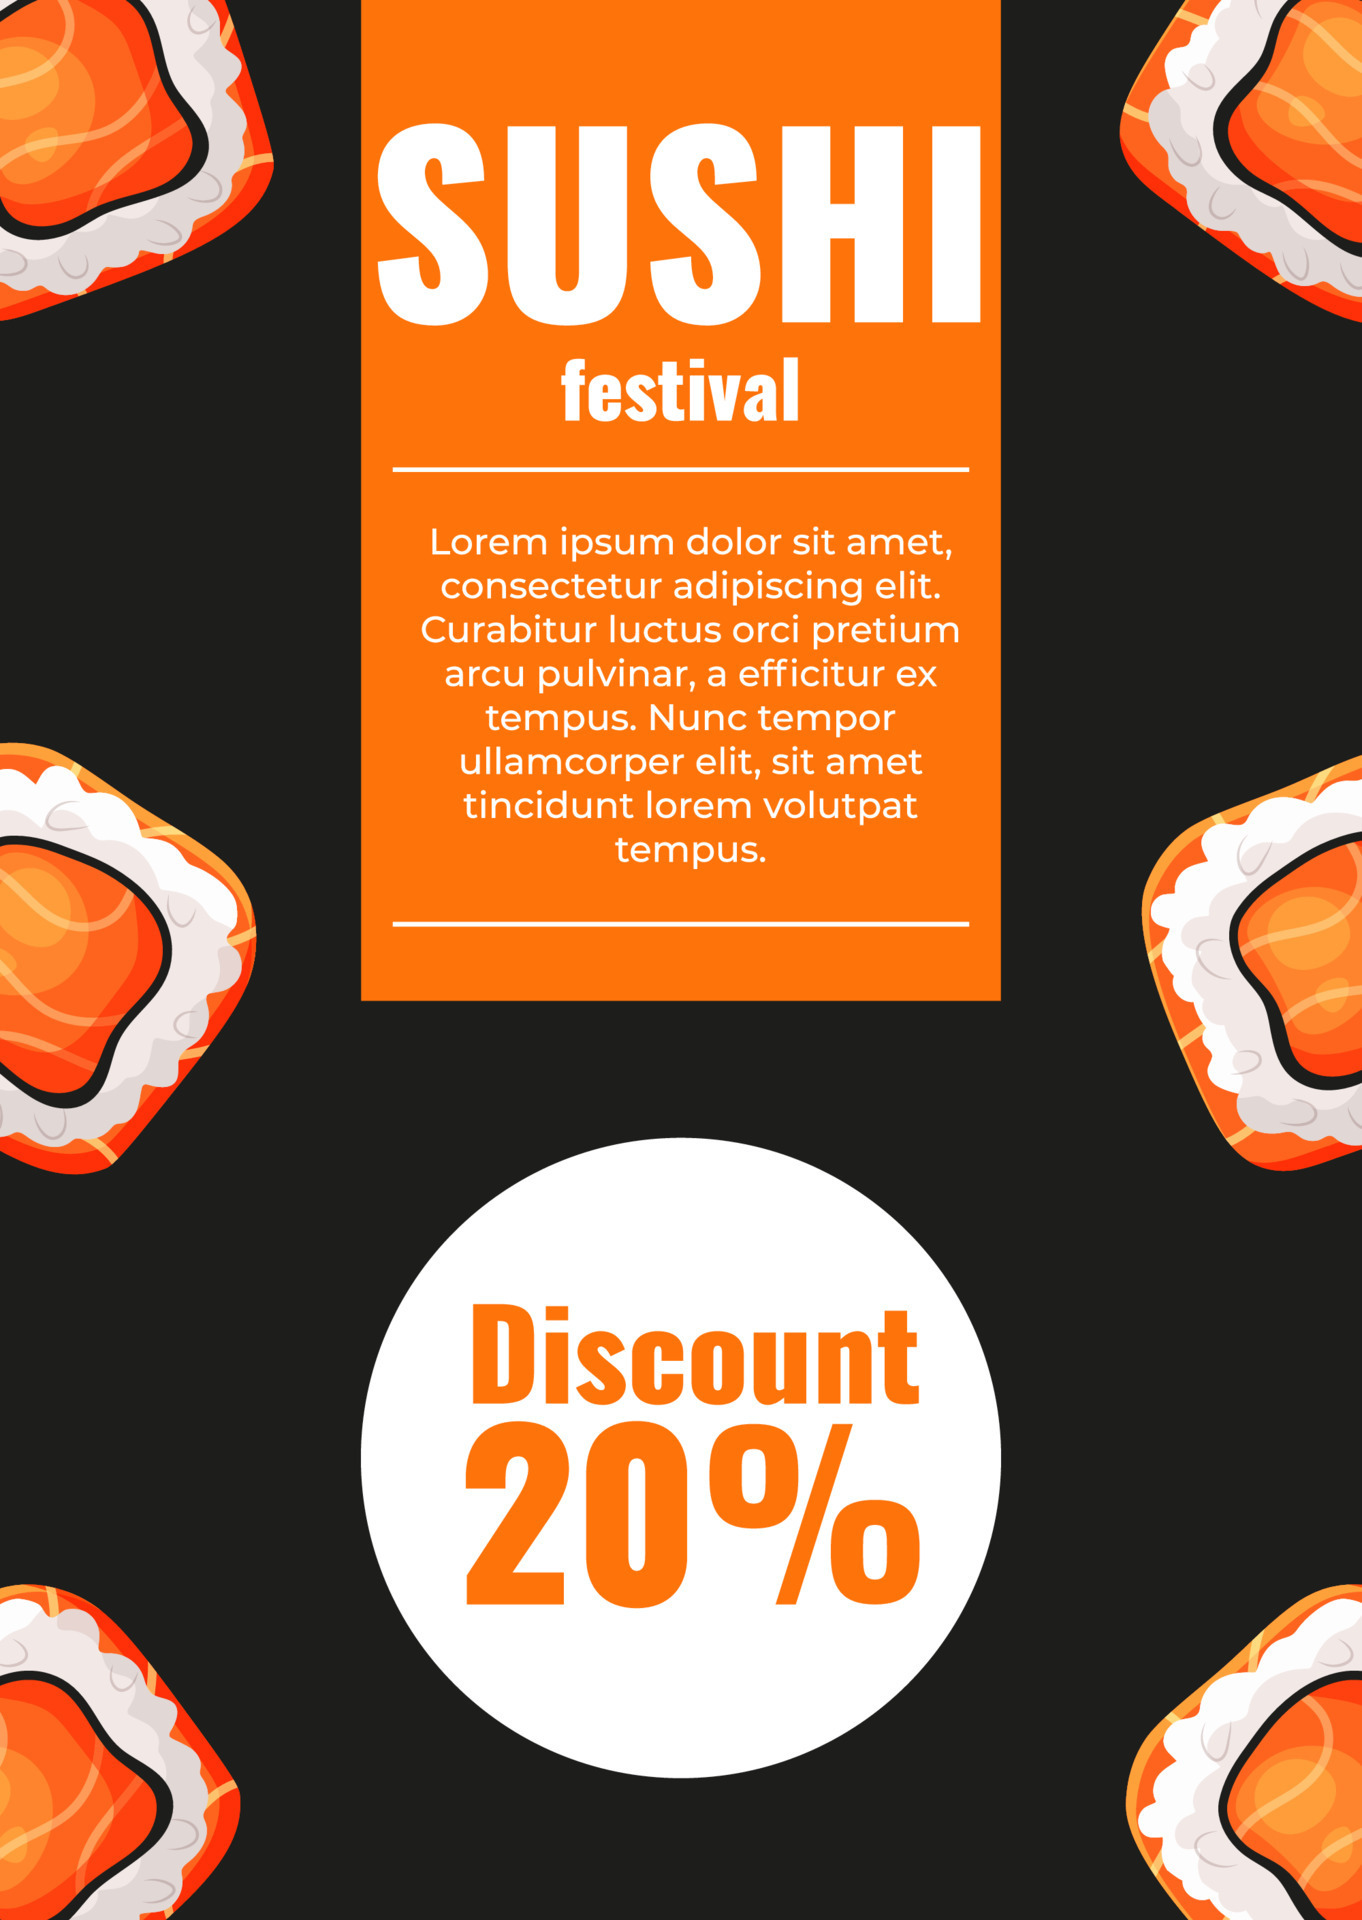 Sushi flyer with 20 percent discount for asian festival. Rolls